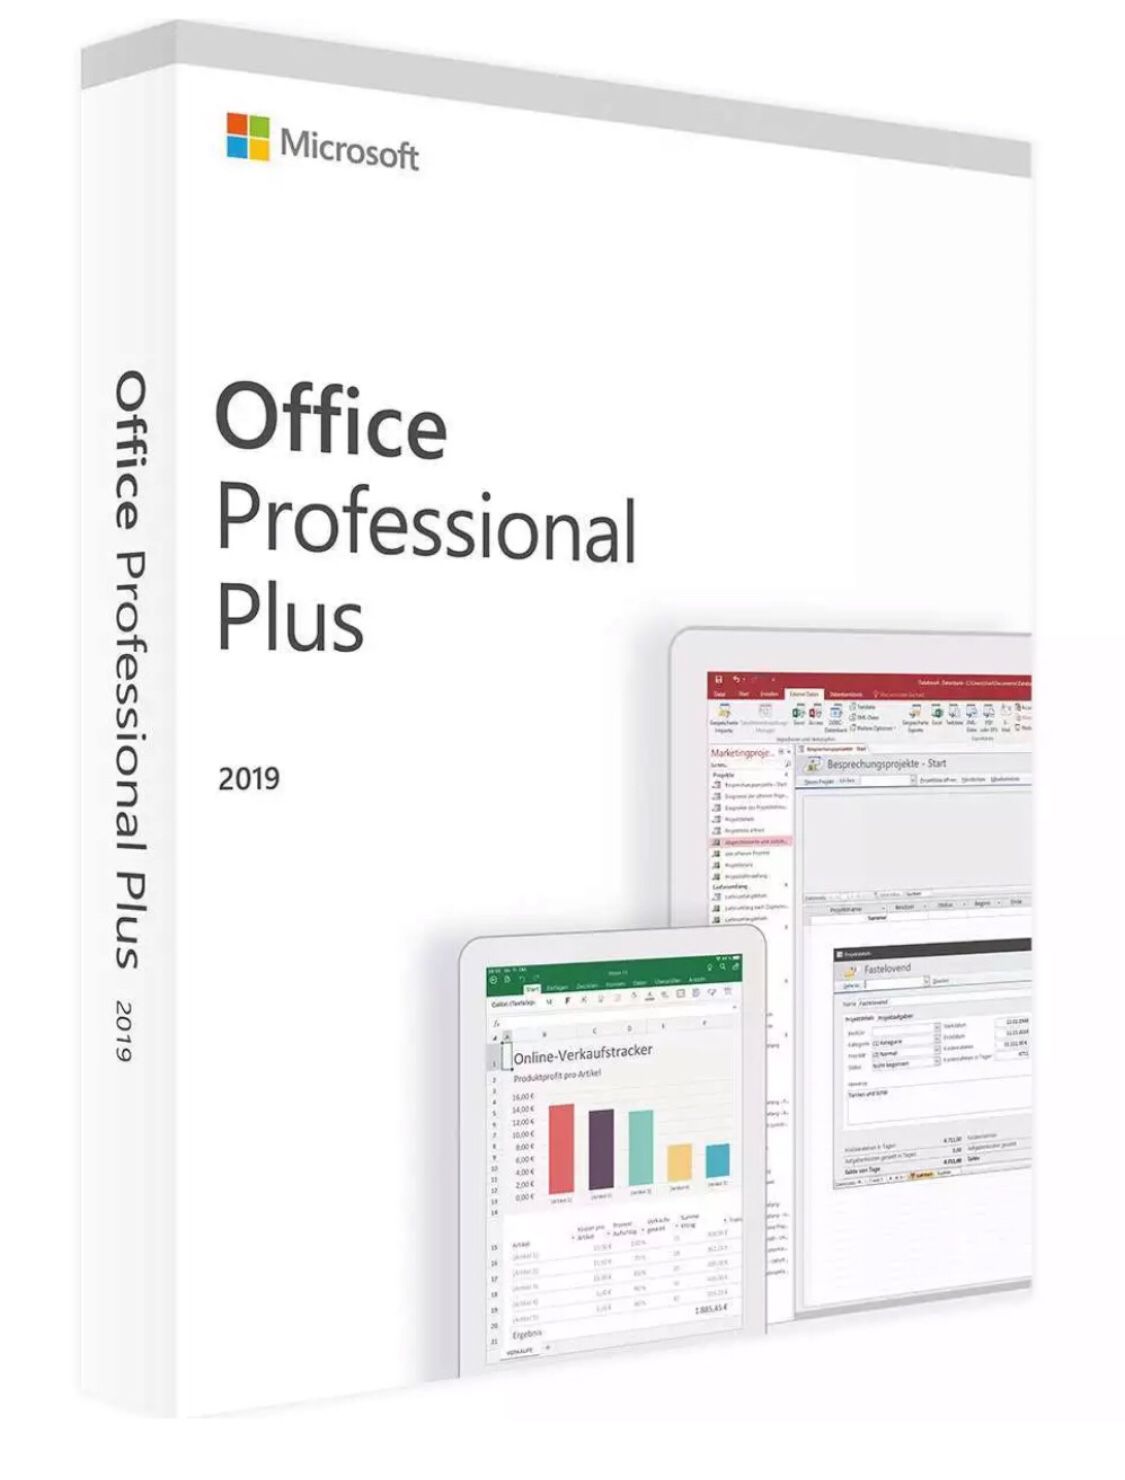 Microsoft Office 2019 for windows laptop and desktop computers